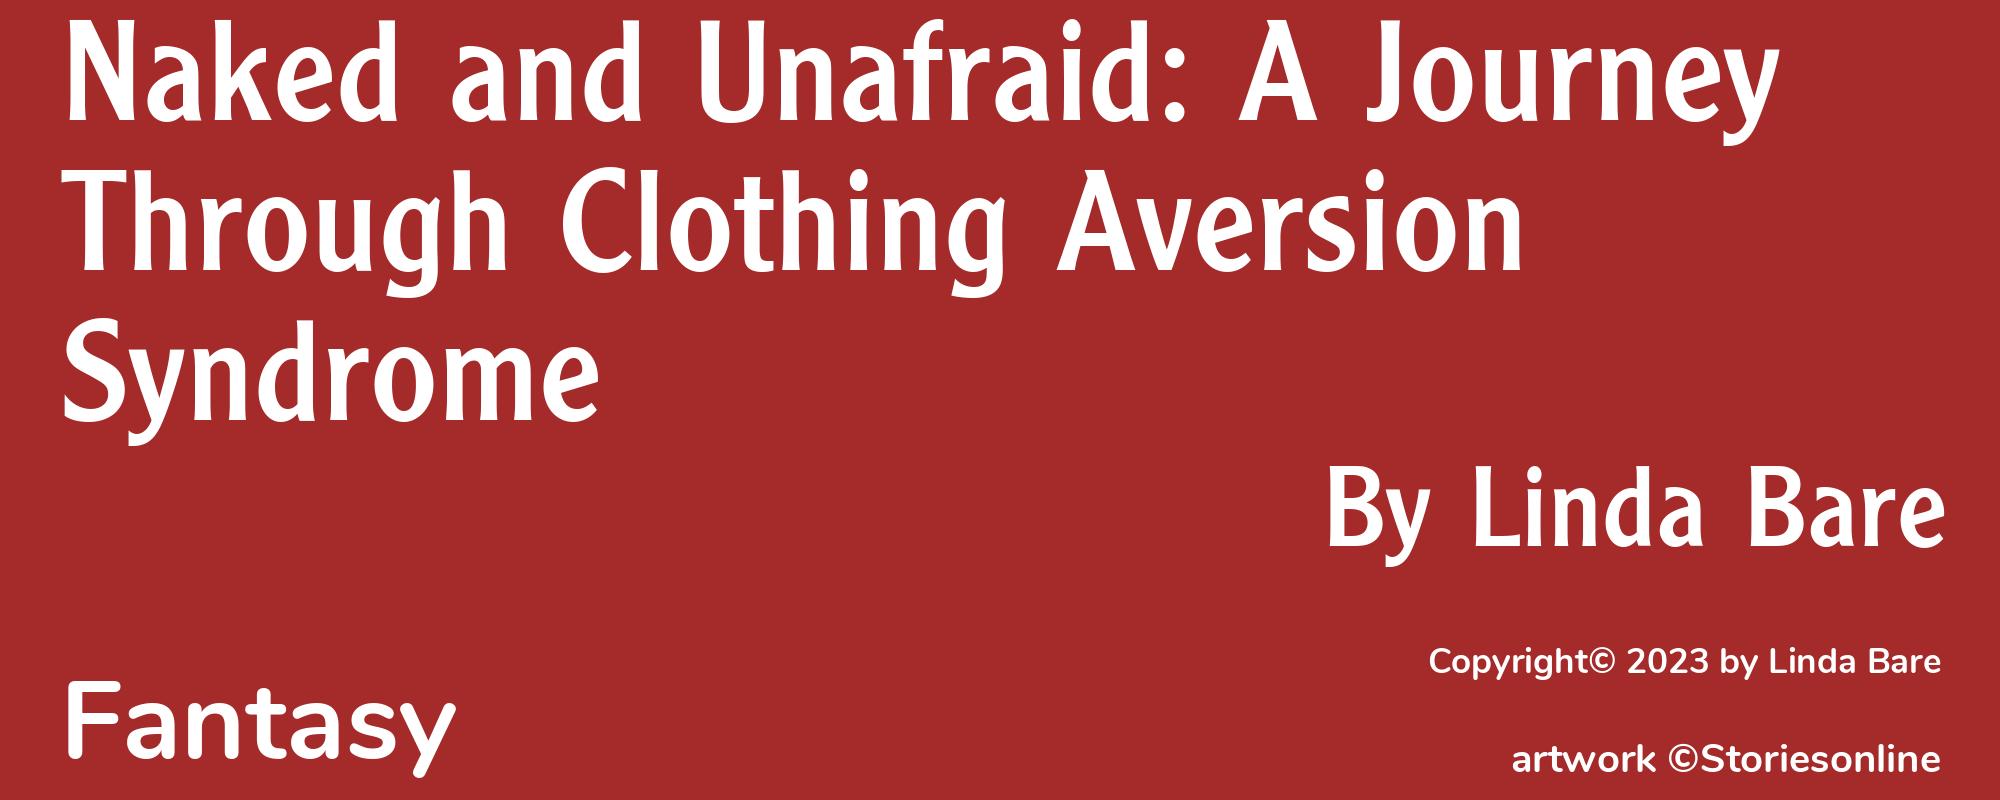 Naked and Unafraid: A Journey Through Clothing Aversion Syndrome - Cover